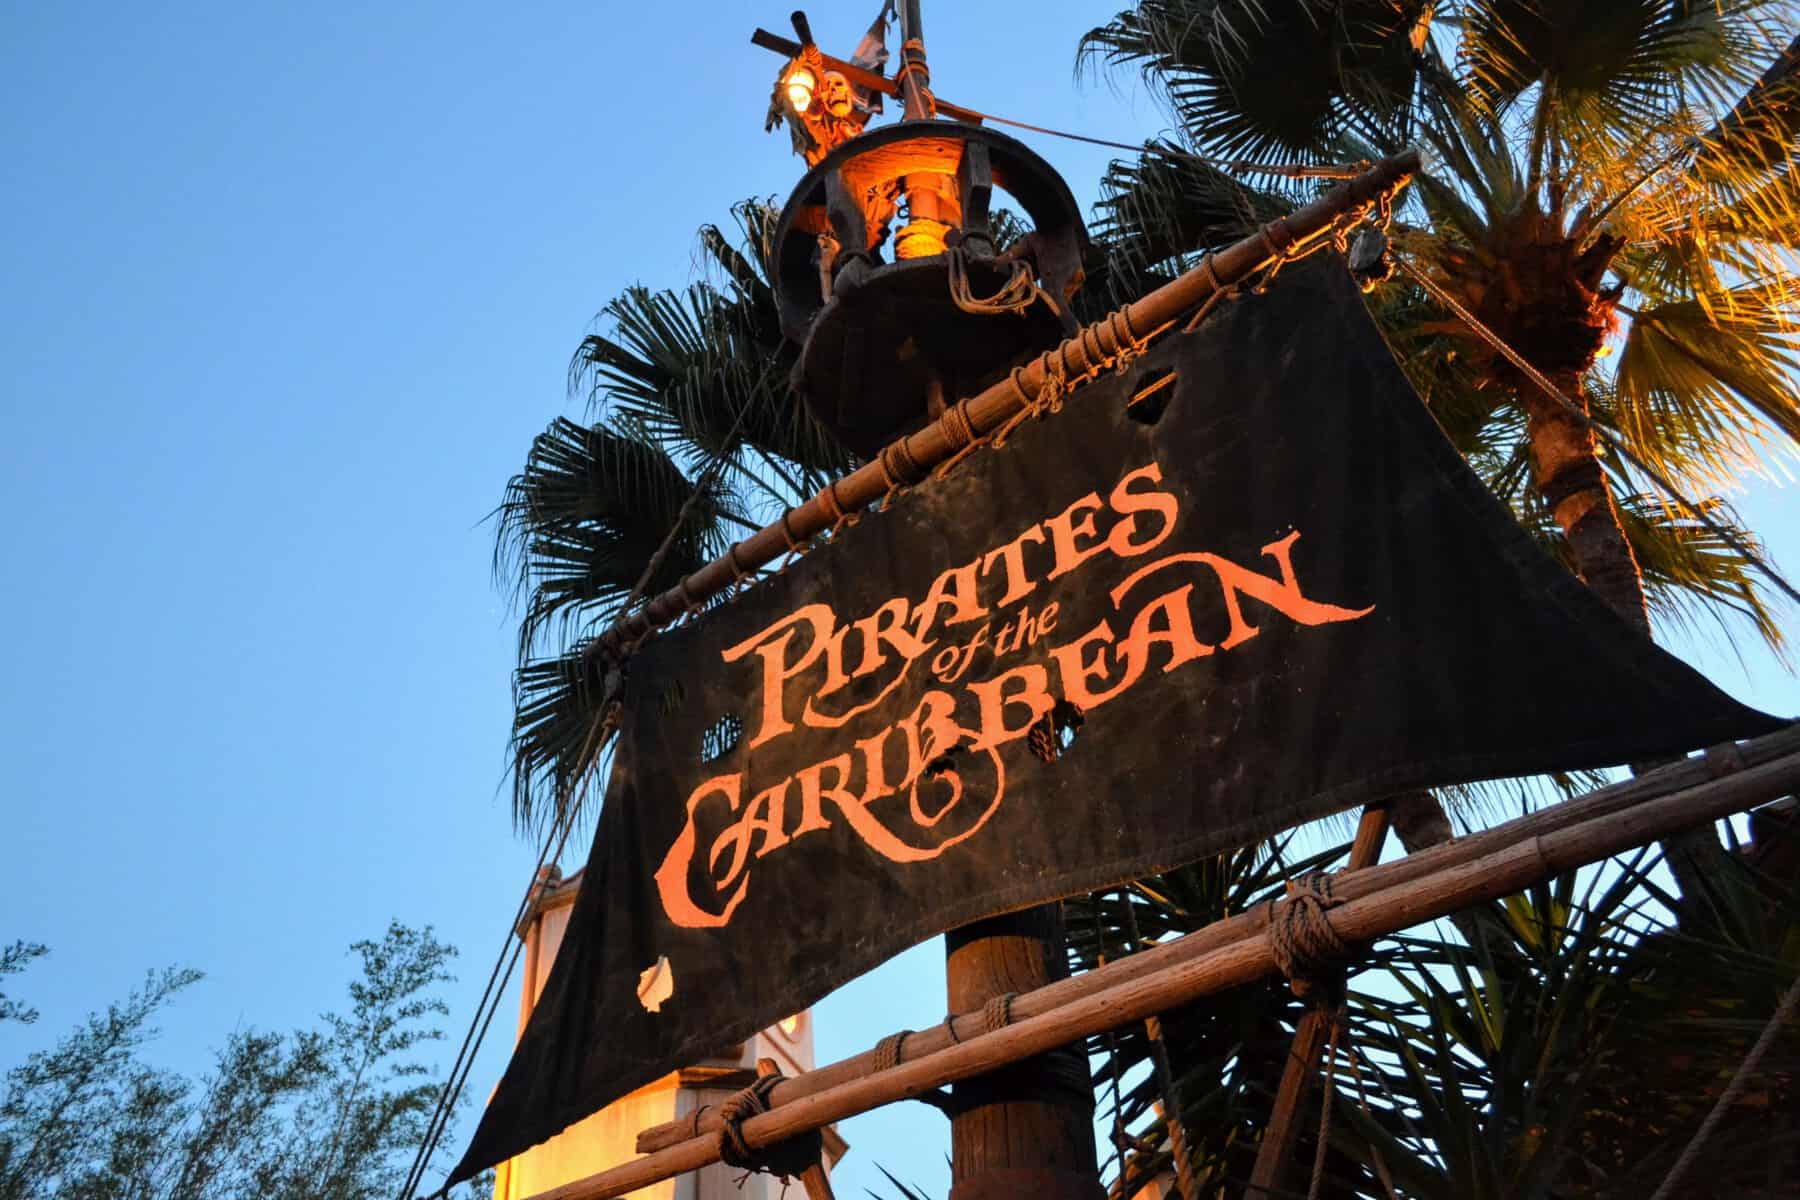 Complete Guide to Pirates of the Caribbean at Magic Kingdom